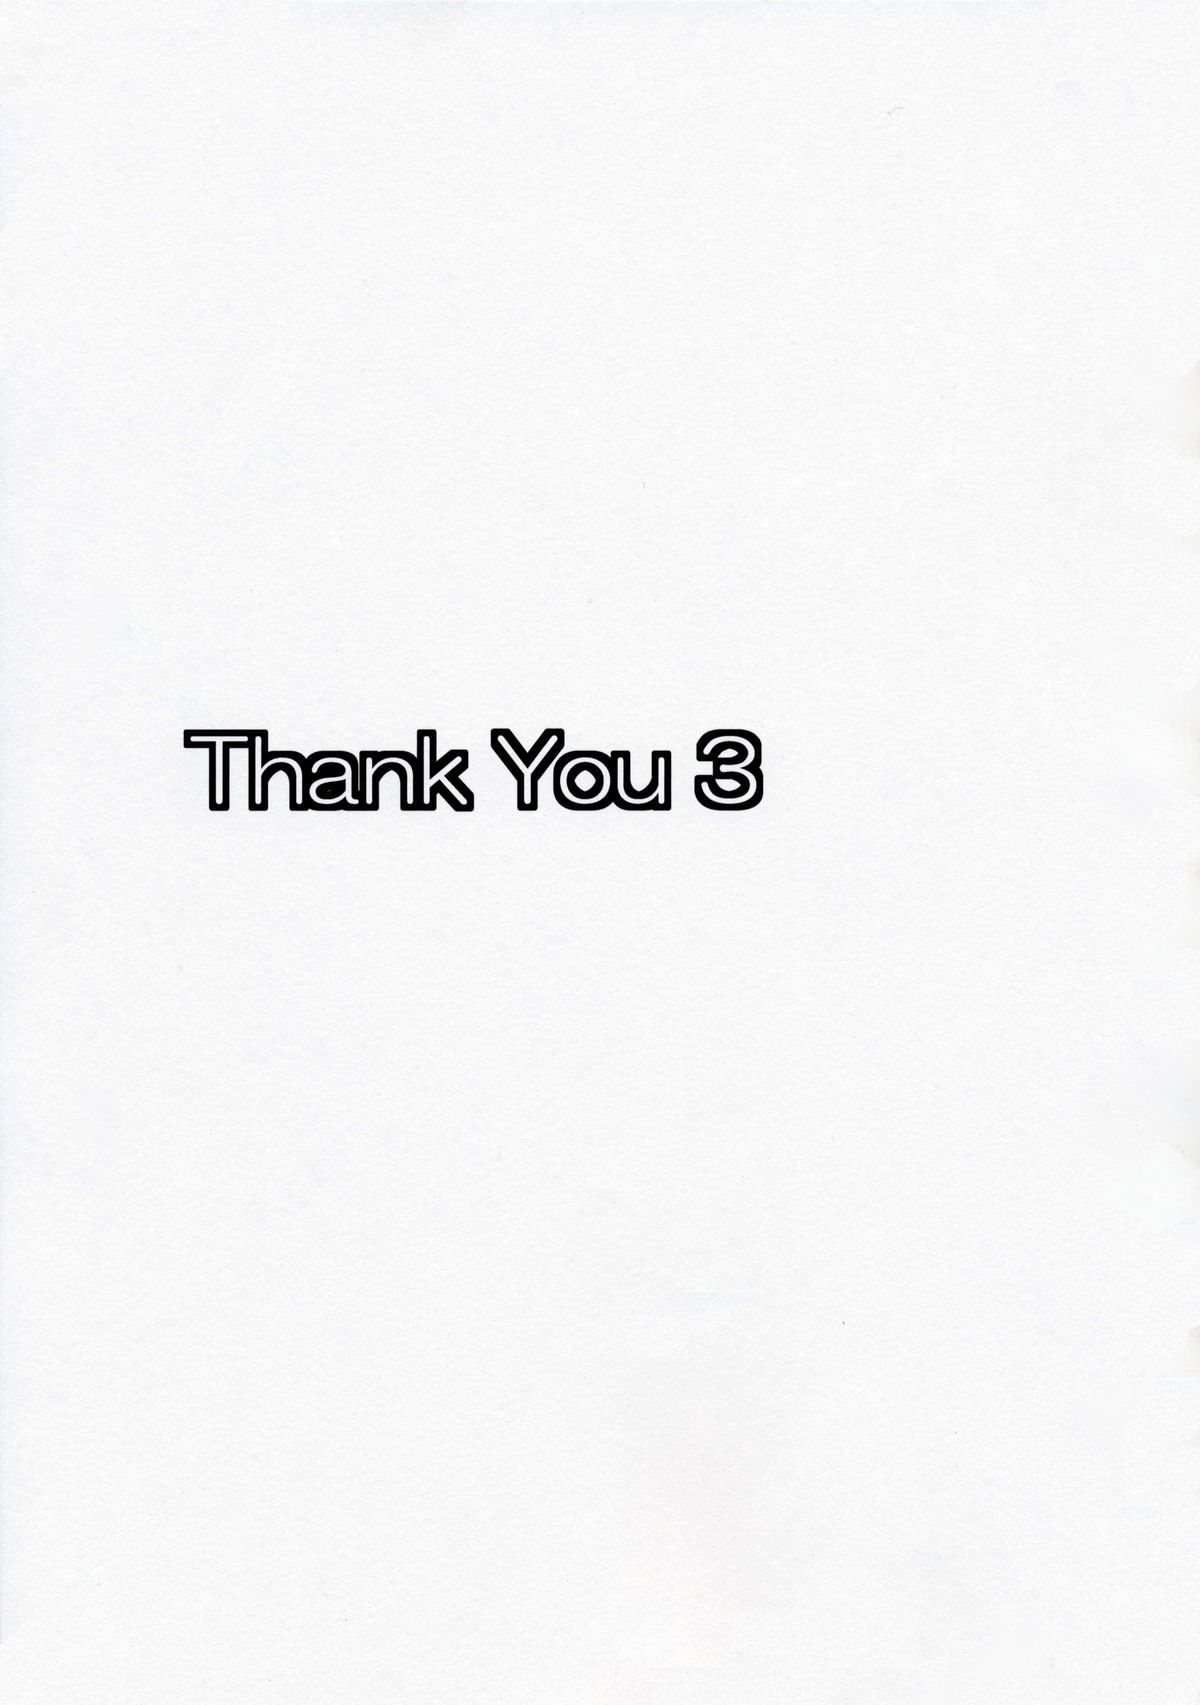 Thank You 3 